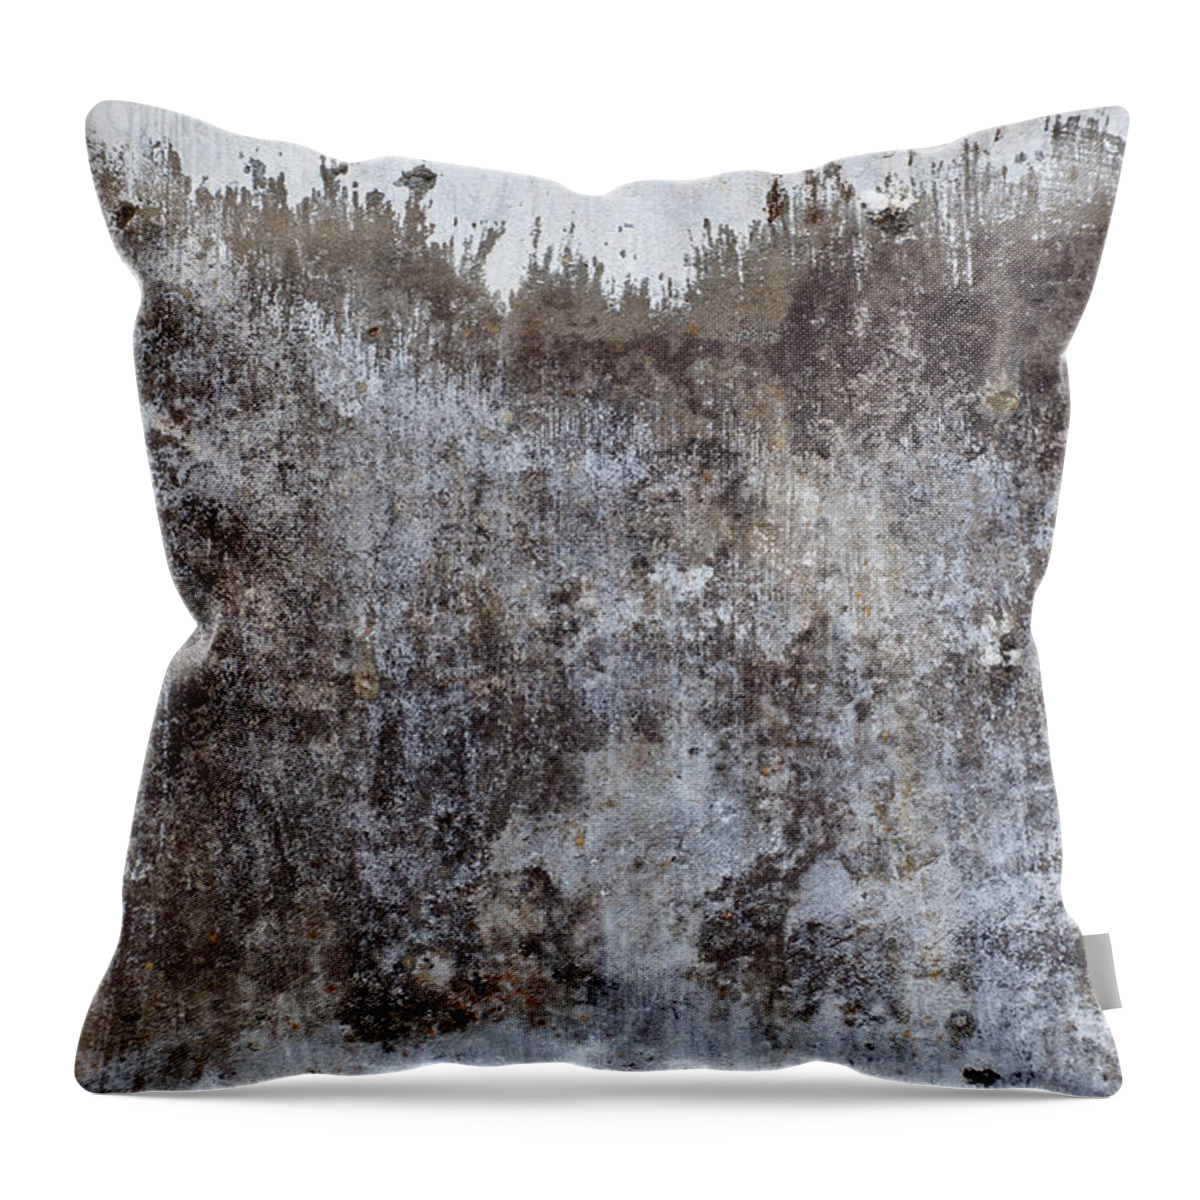 Shades Of Gray Throw Pillow featuring the photograph Snowy Mountain Top 3 by Jani Freimann